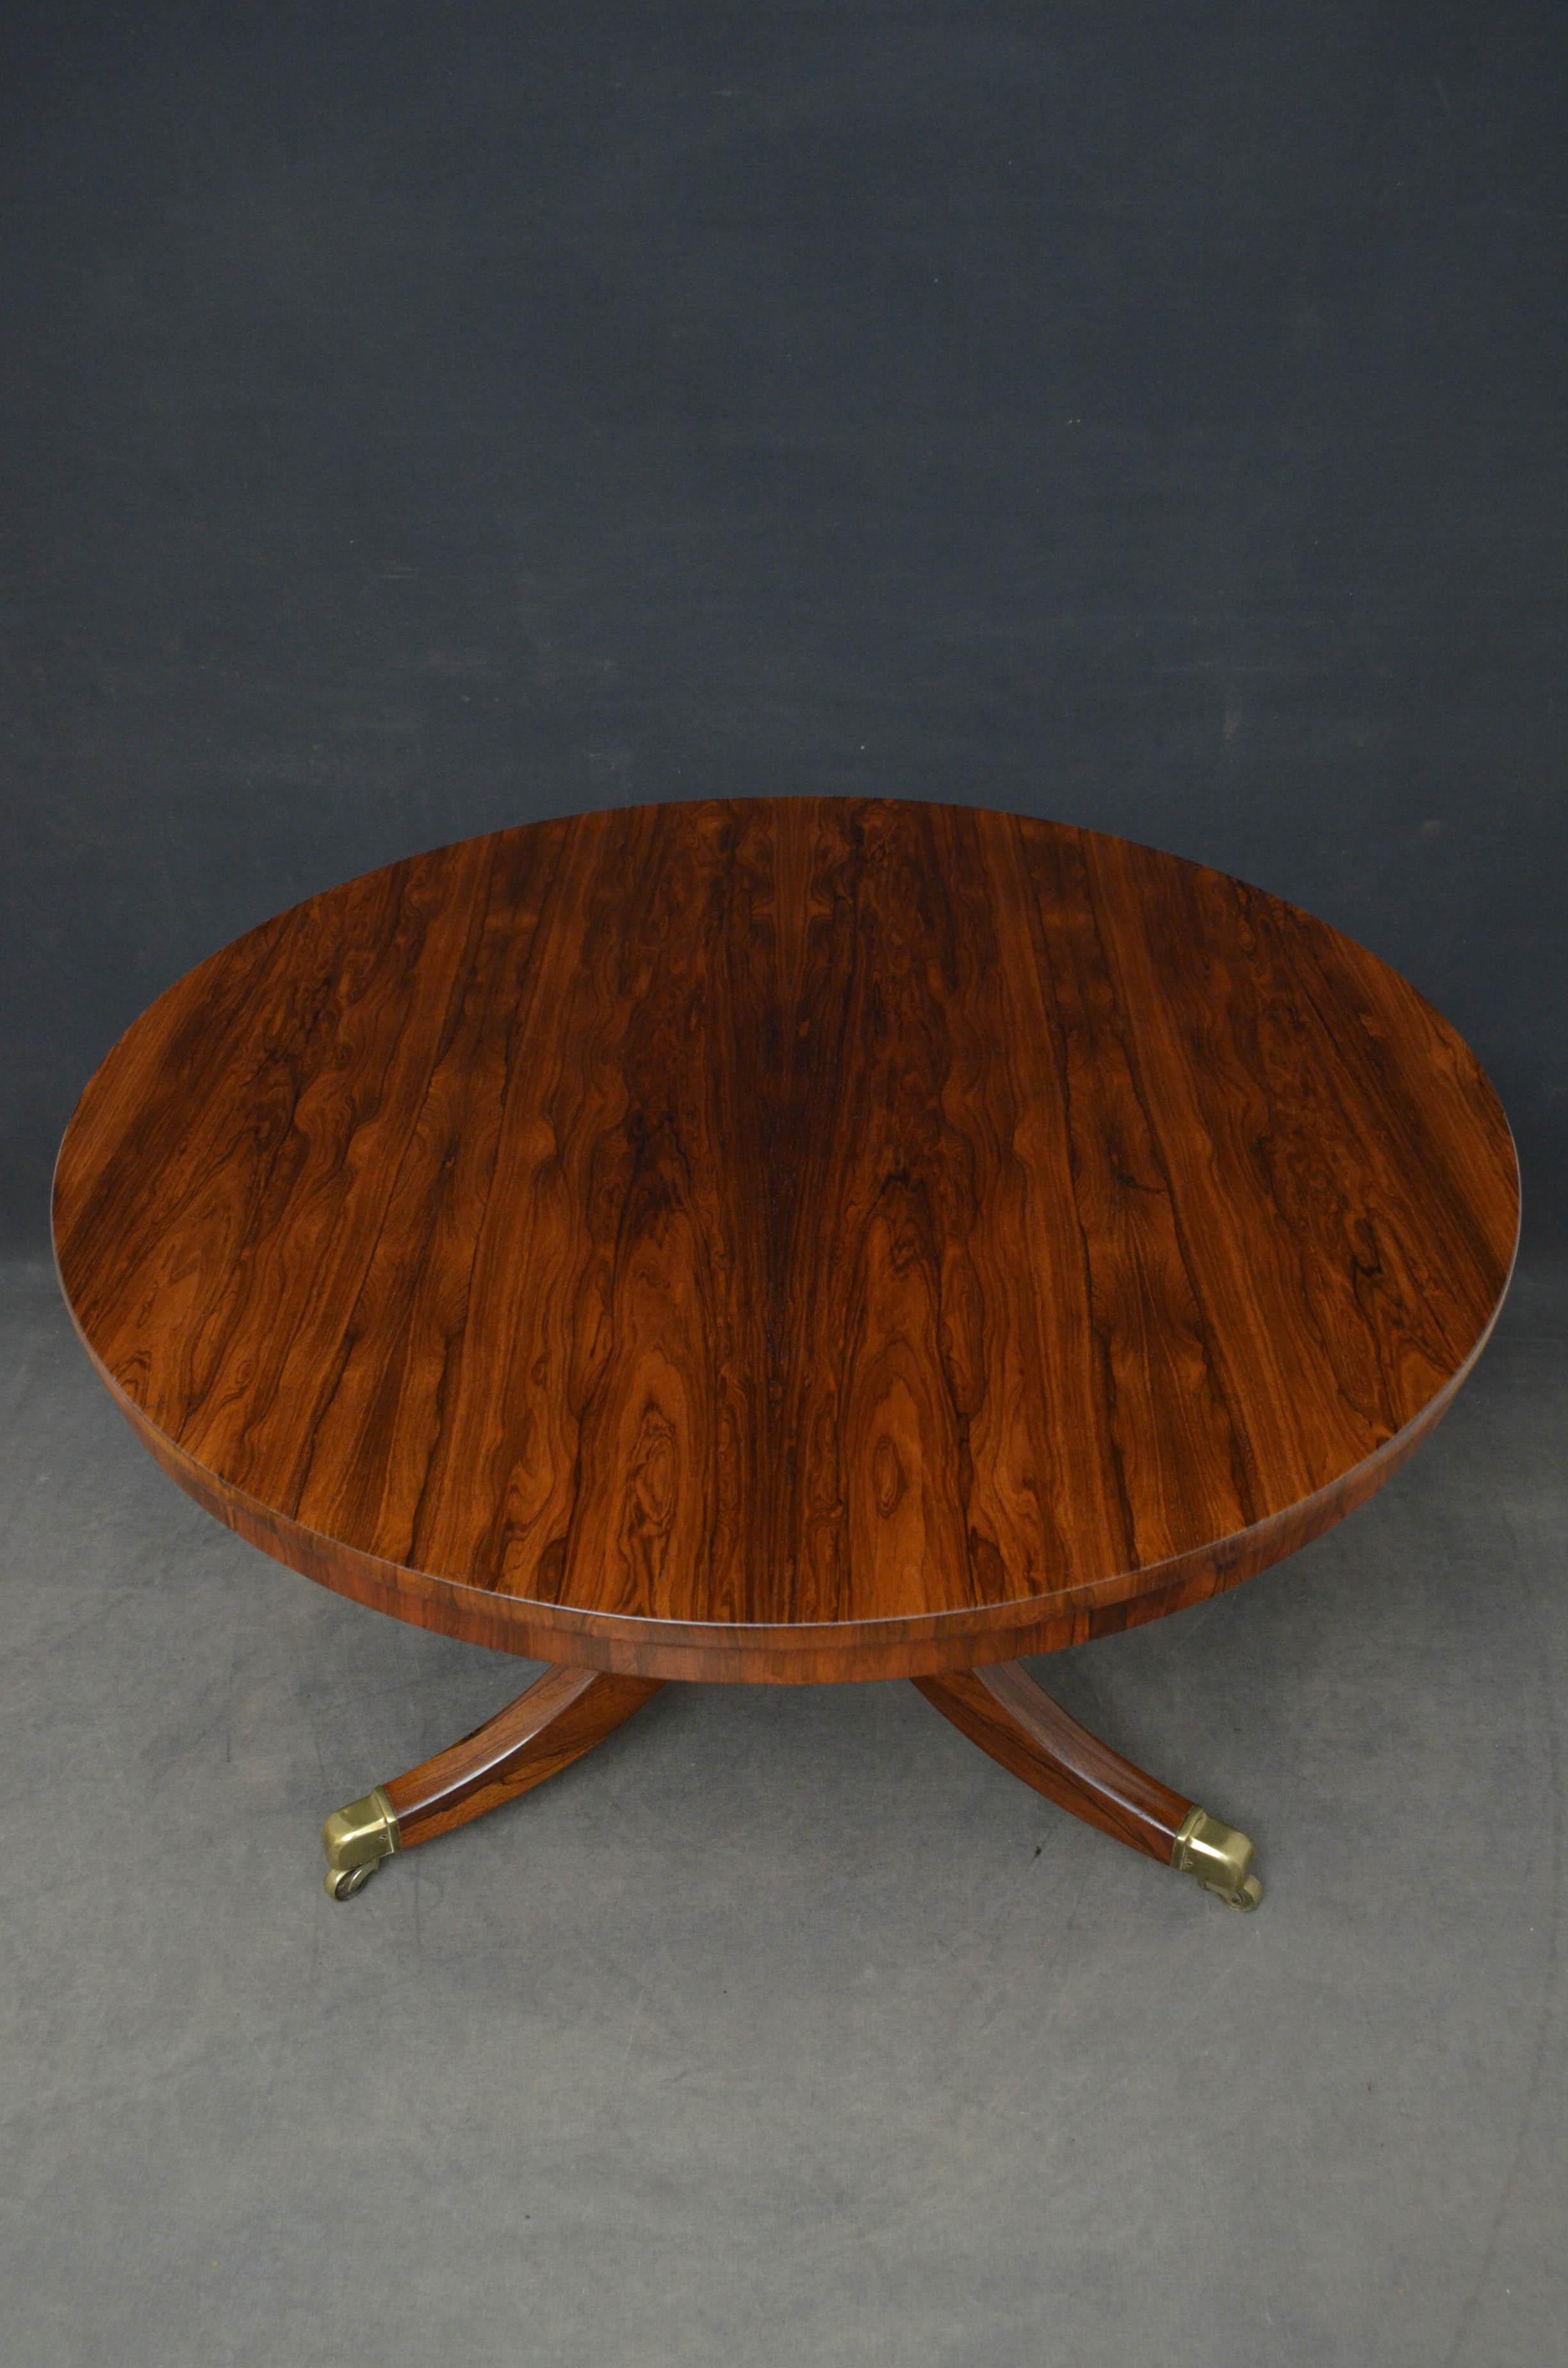 Sn4689 fine quality Regency tilt top dining table in rosewood, having stunning top on turned column terminating in 3 downswept legs and original brass castors.
This antique table has been sympathetically restored and is ready to place at home,